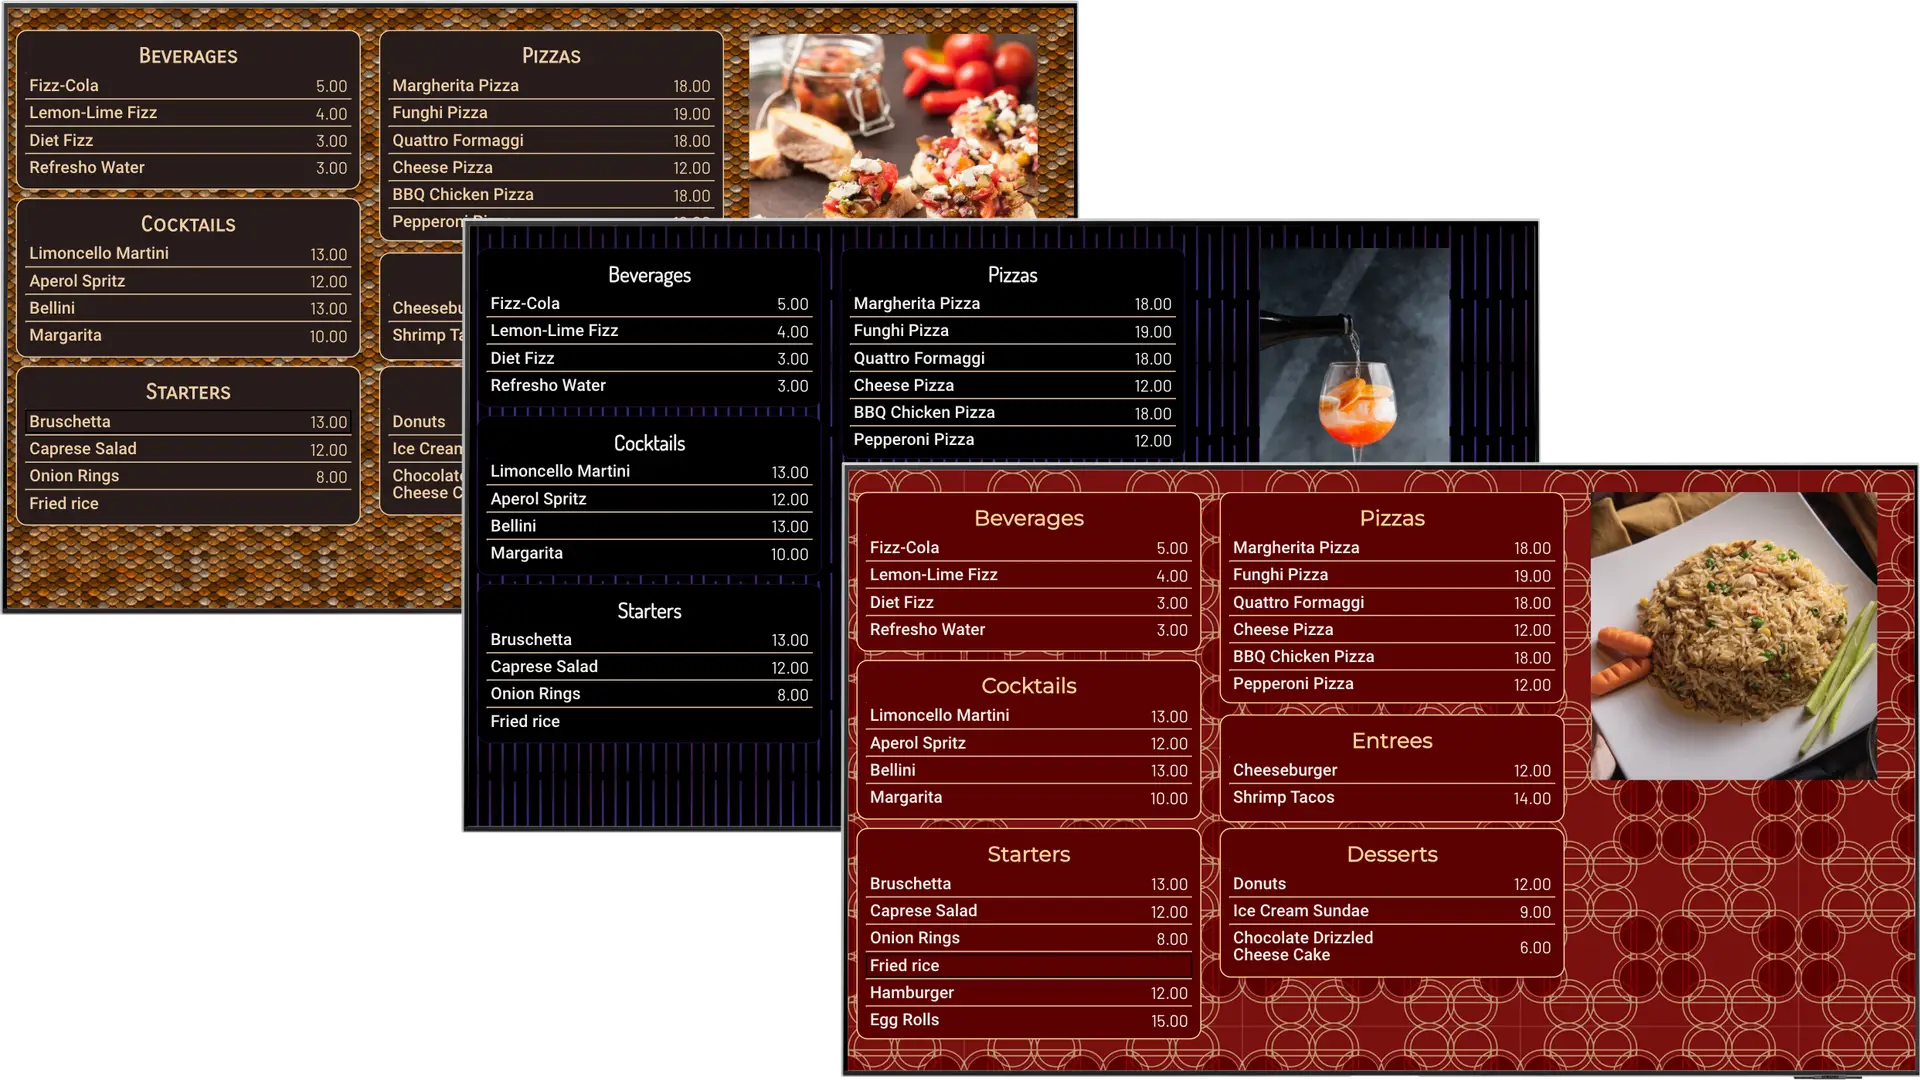 A digital menu sign displaying sections for beverages, pizzas, entrees, starters, cocktails, and desserts, with a clear, bright design on an elegant background.